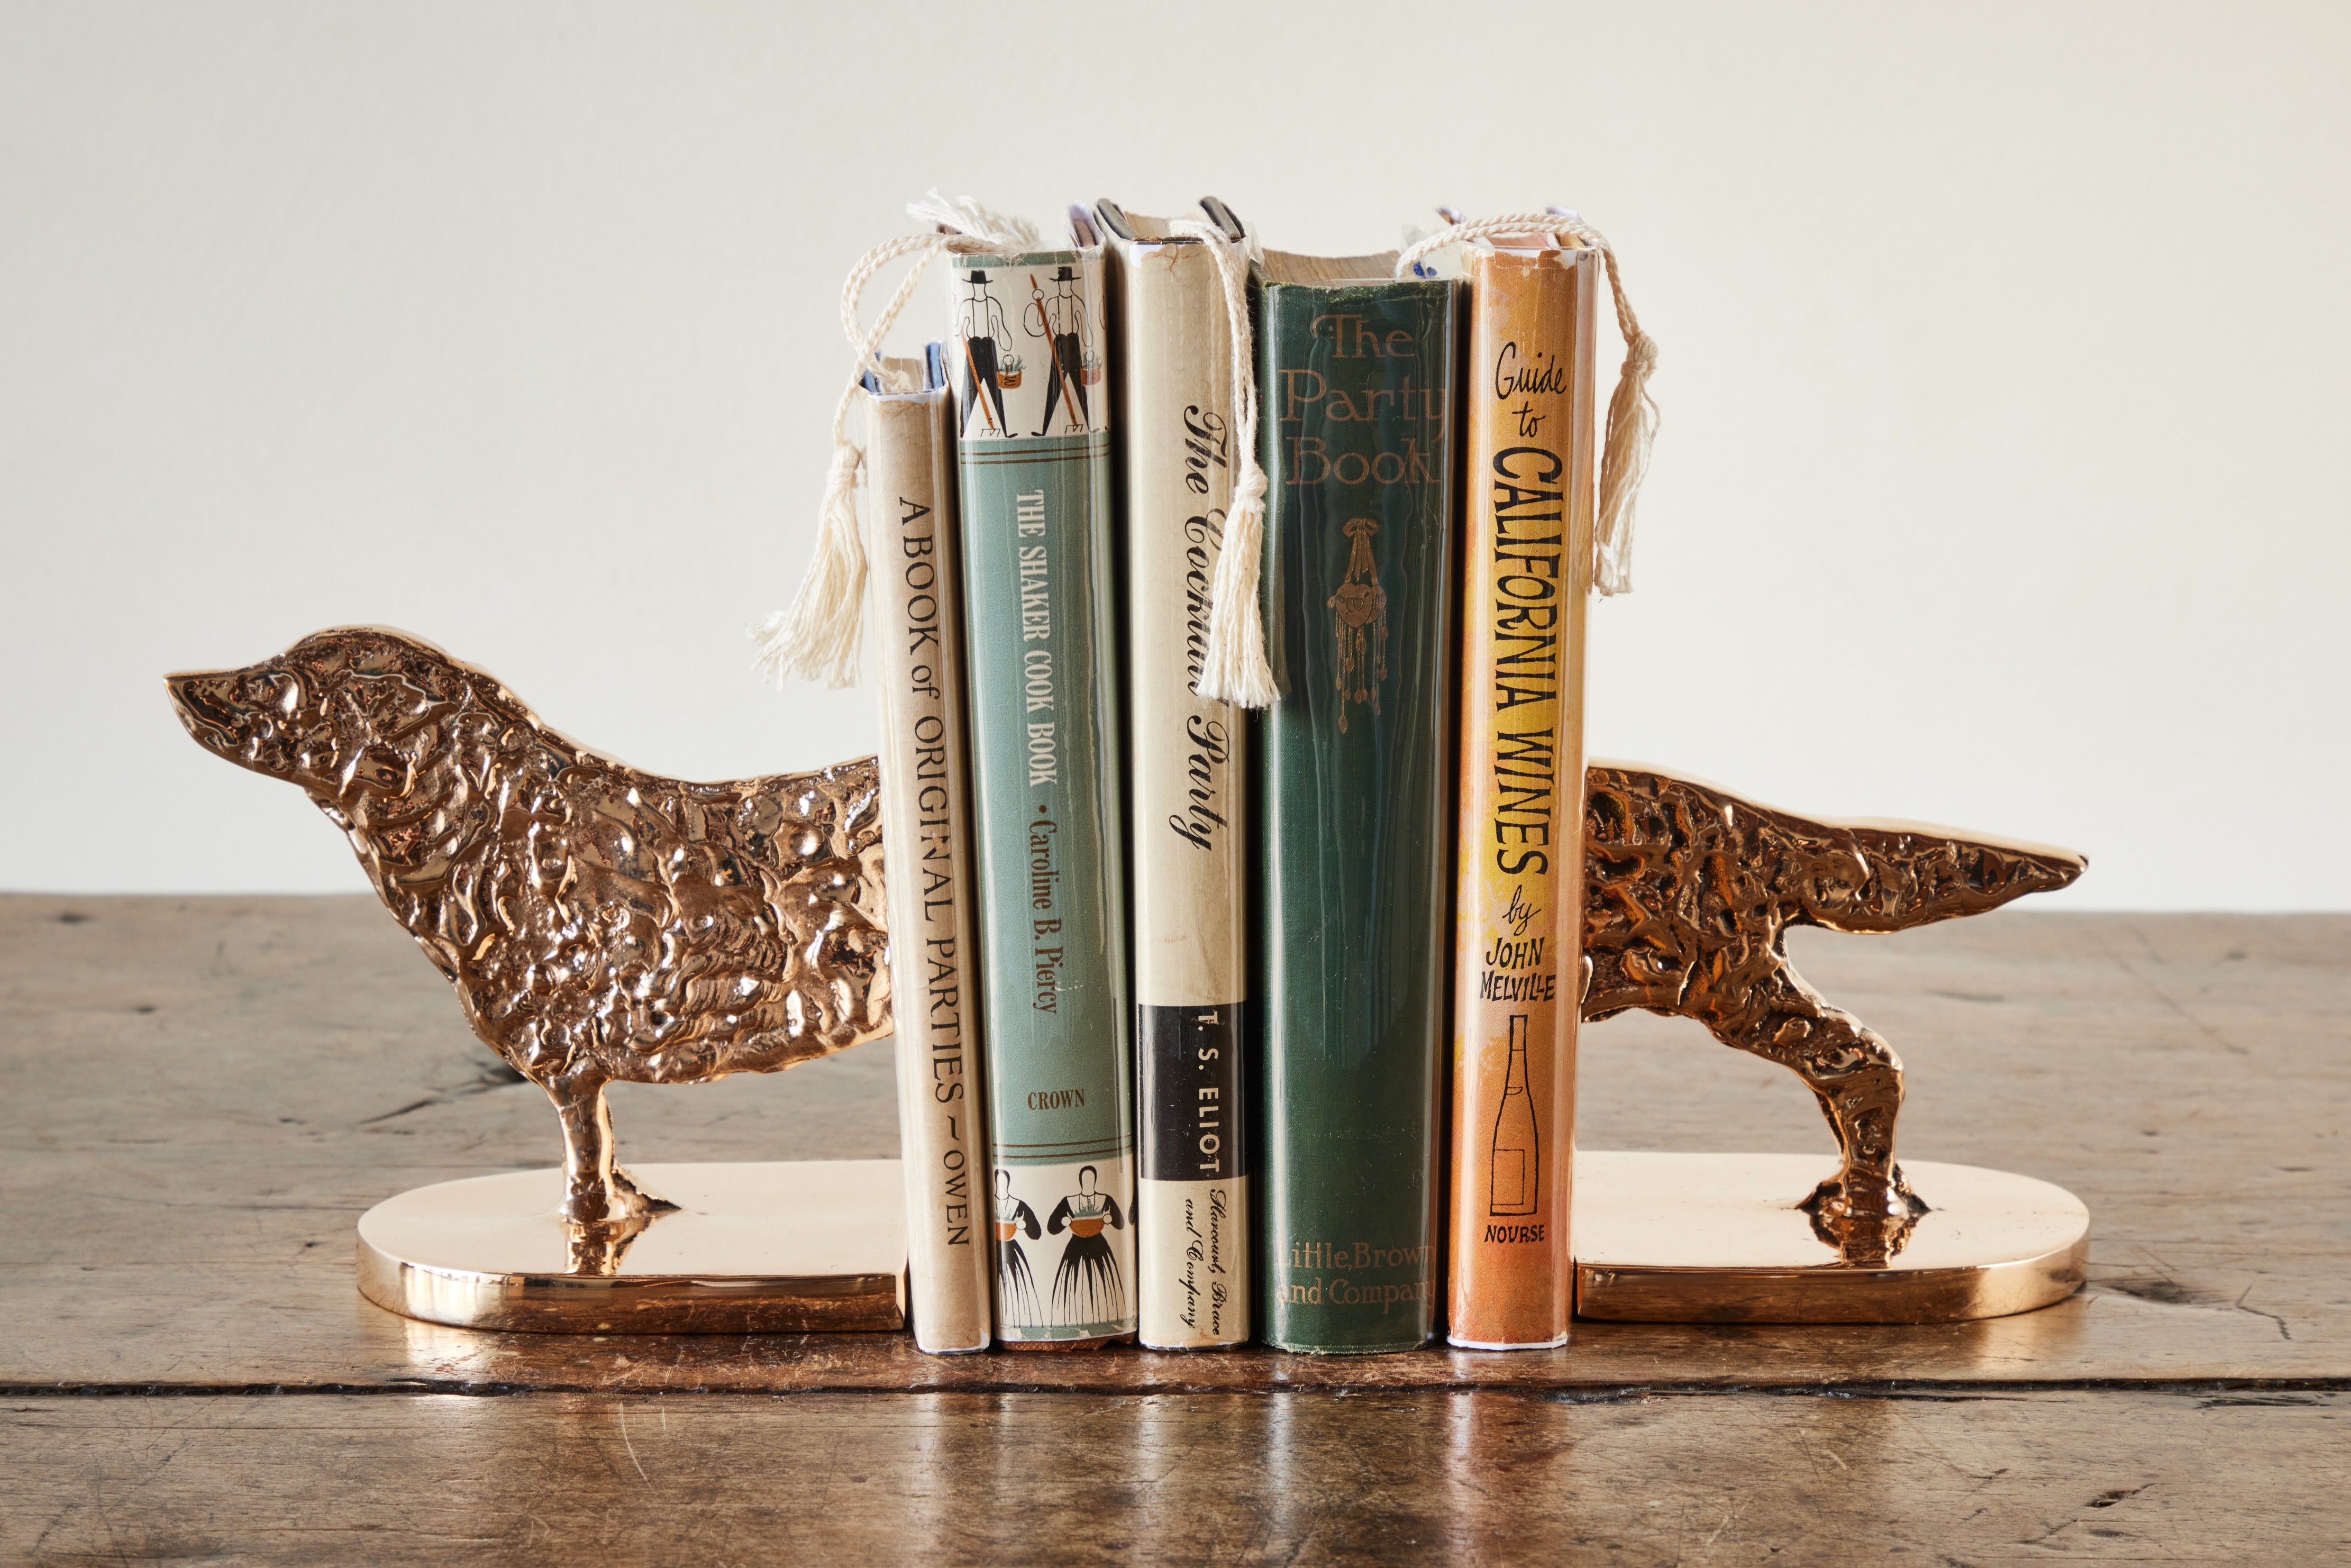 3653 Pair of Brass Bookends – lawson-fenning